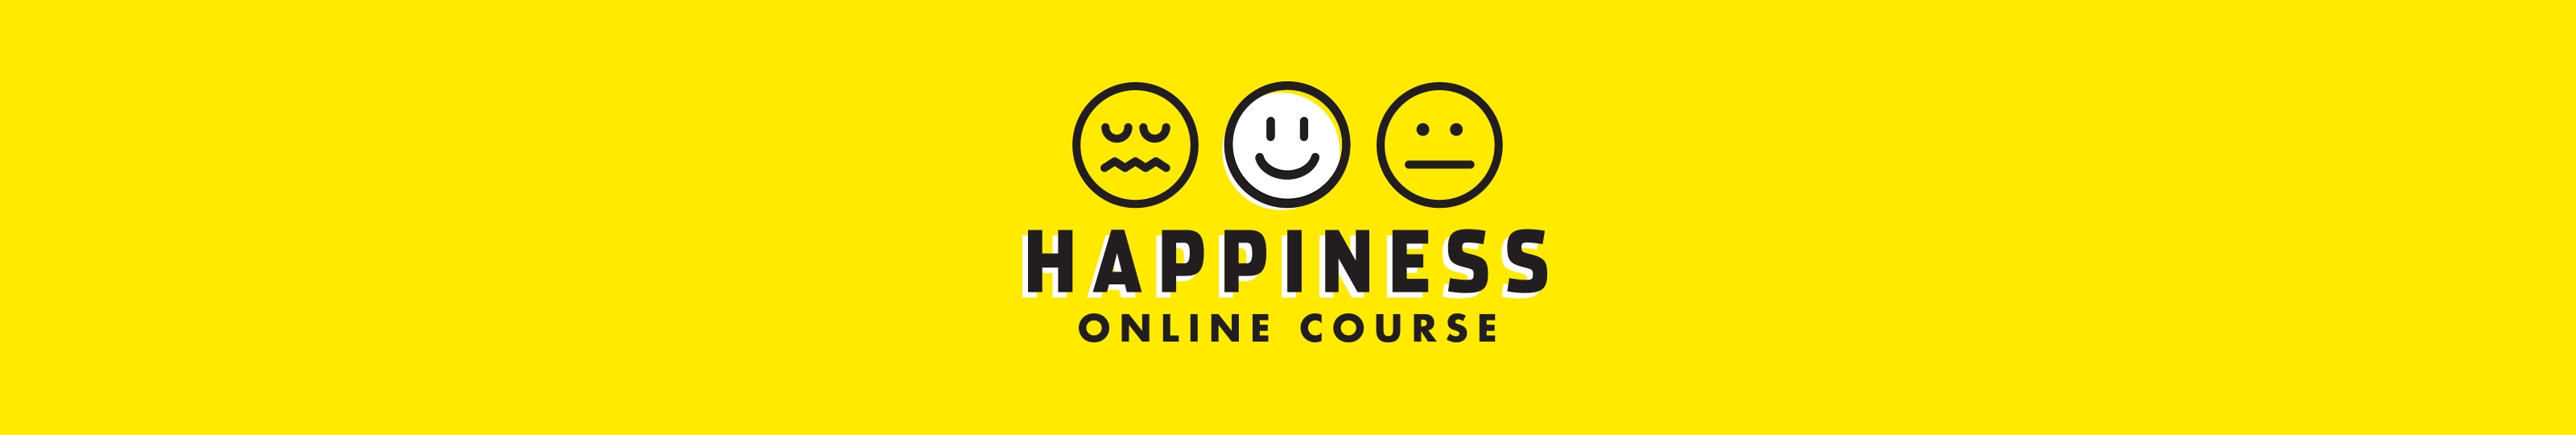 Happiness Online Course